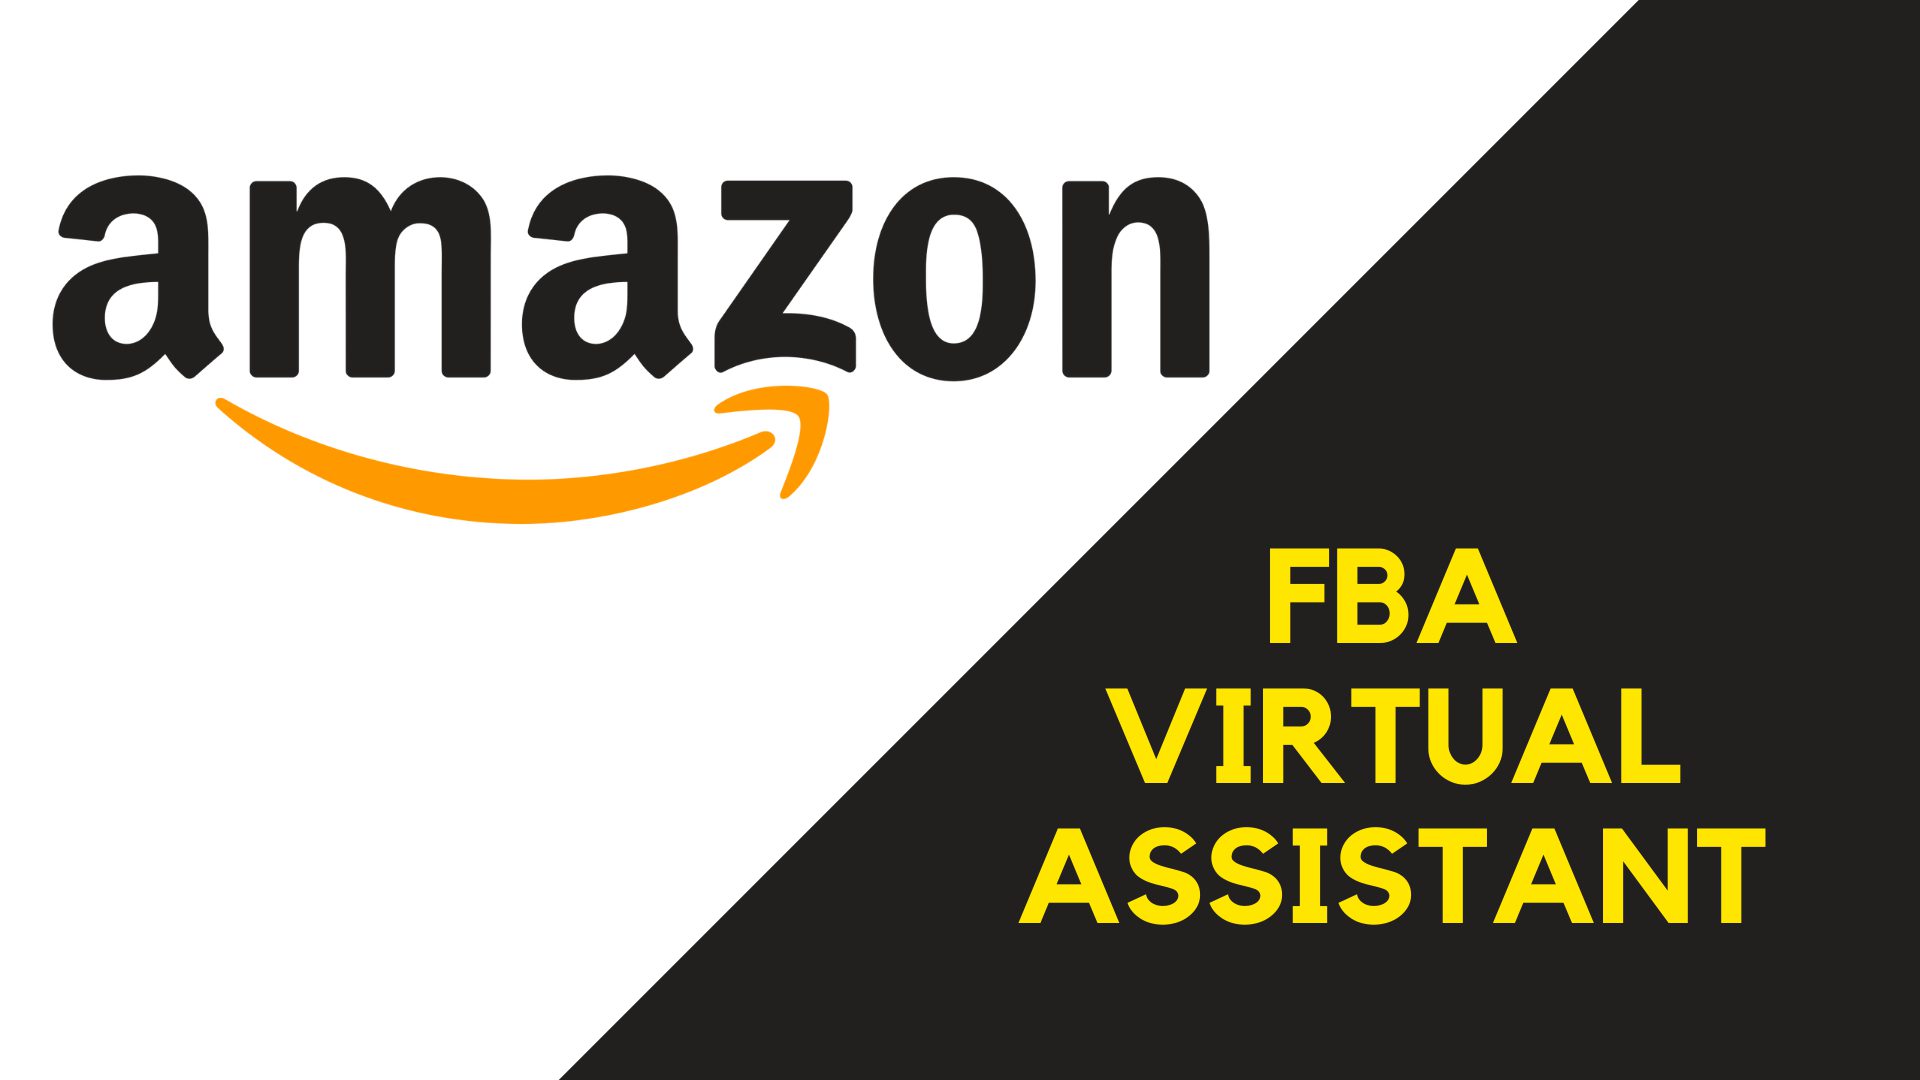 Amazon Seller Guide – Why Hire an Amazon FBA Virtual Assistant